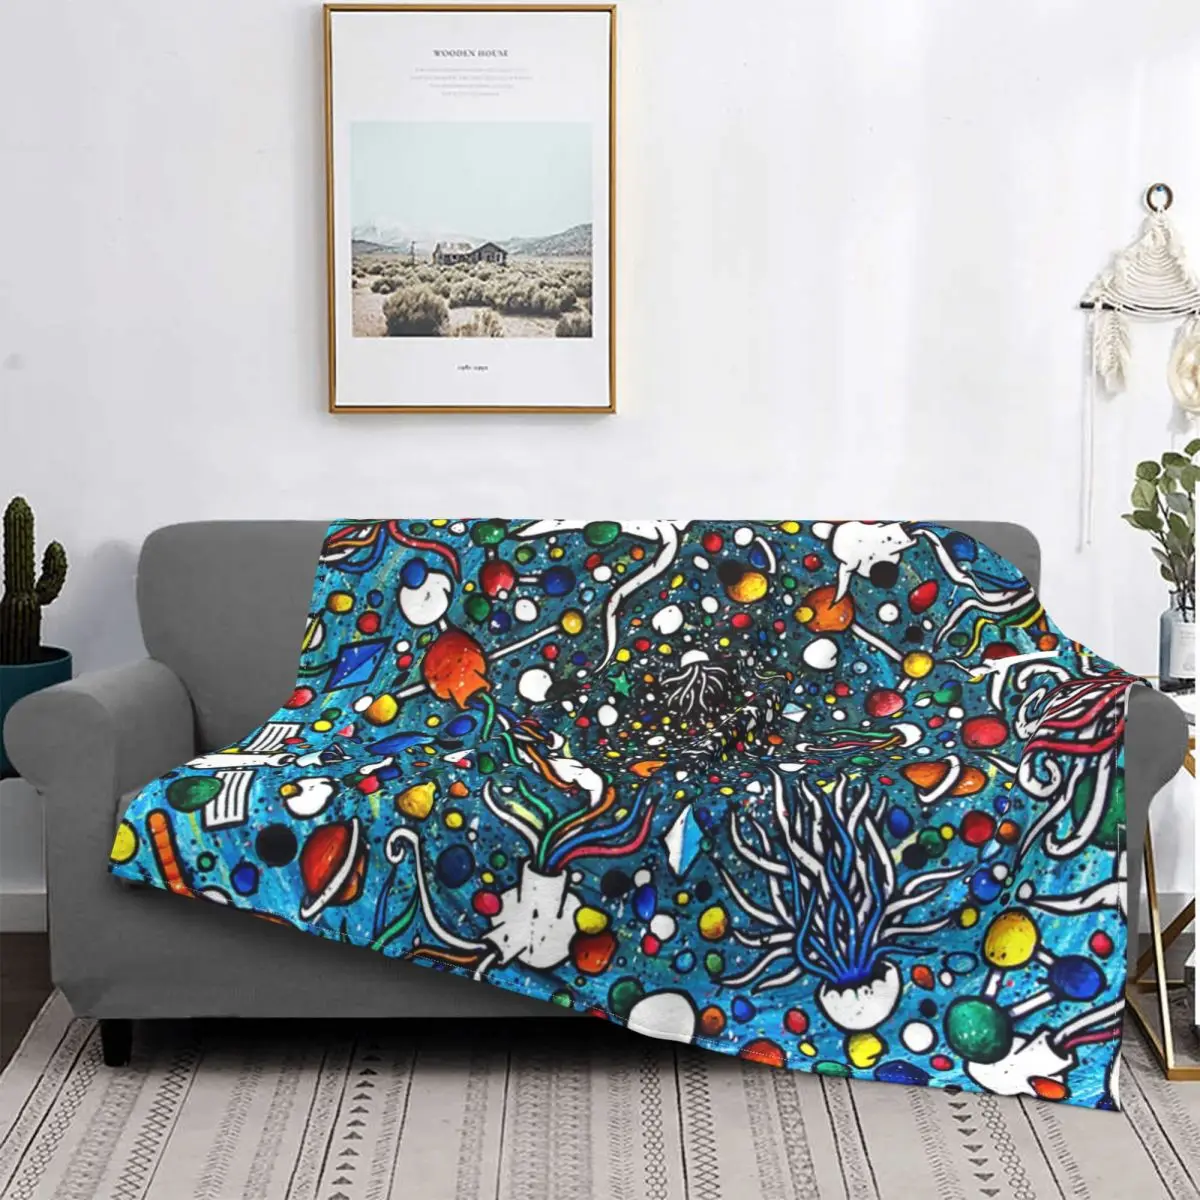 

Space-Ocean Big Bang Blankets Fleece Decoration Ultra-Soft Throw Blankets for Bedding Bedroom Plush Thin Quilt